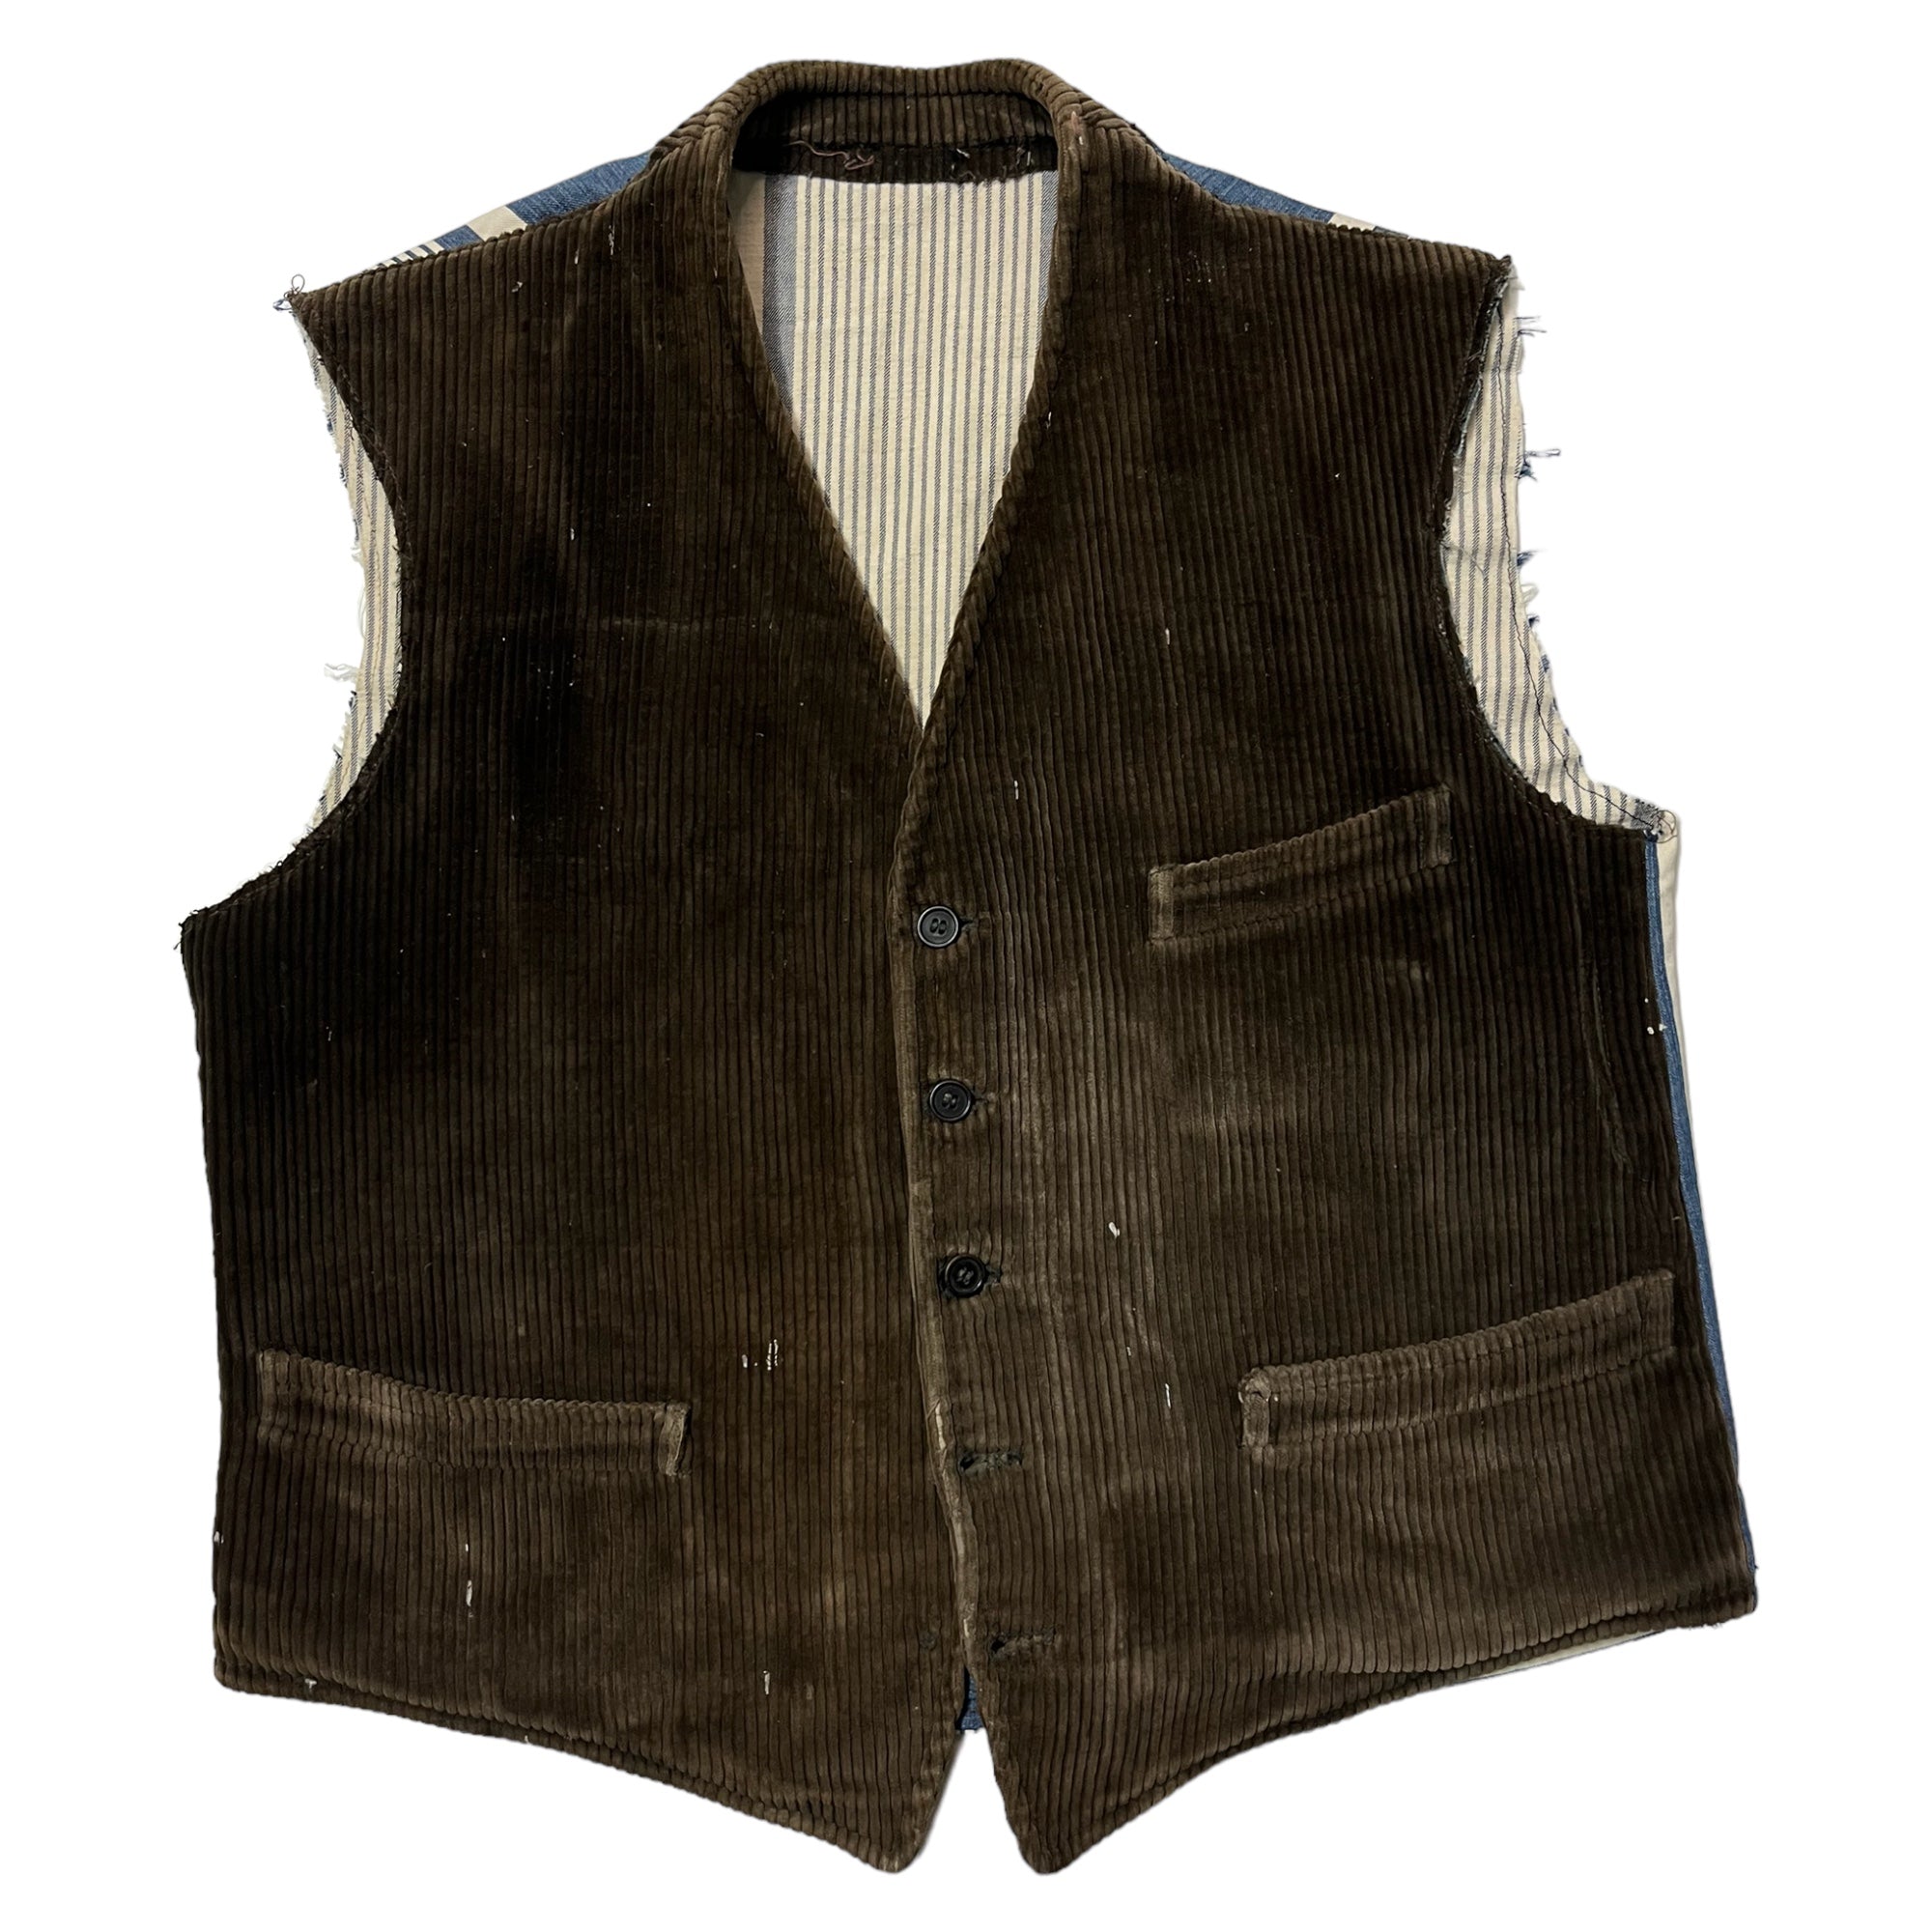 1920s/30s French Corduroy Vest with Replaced ‘Napkin’ Back - Coffee Brown - S